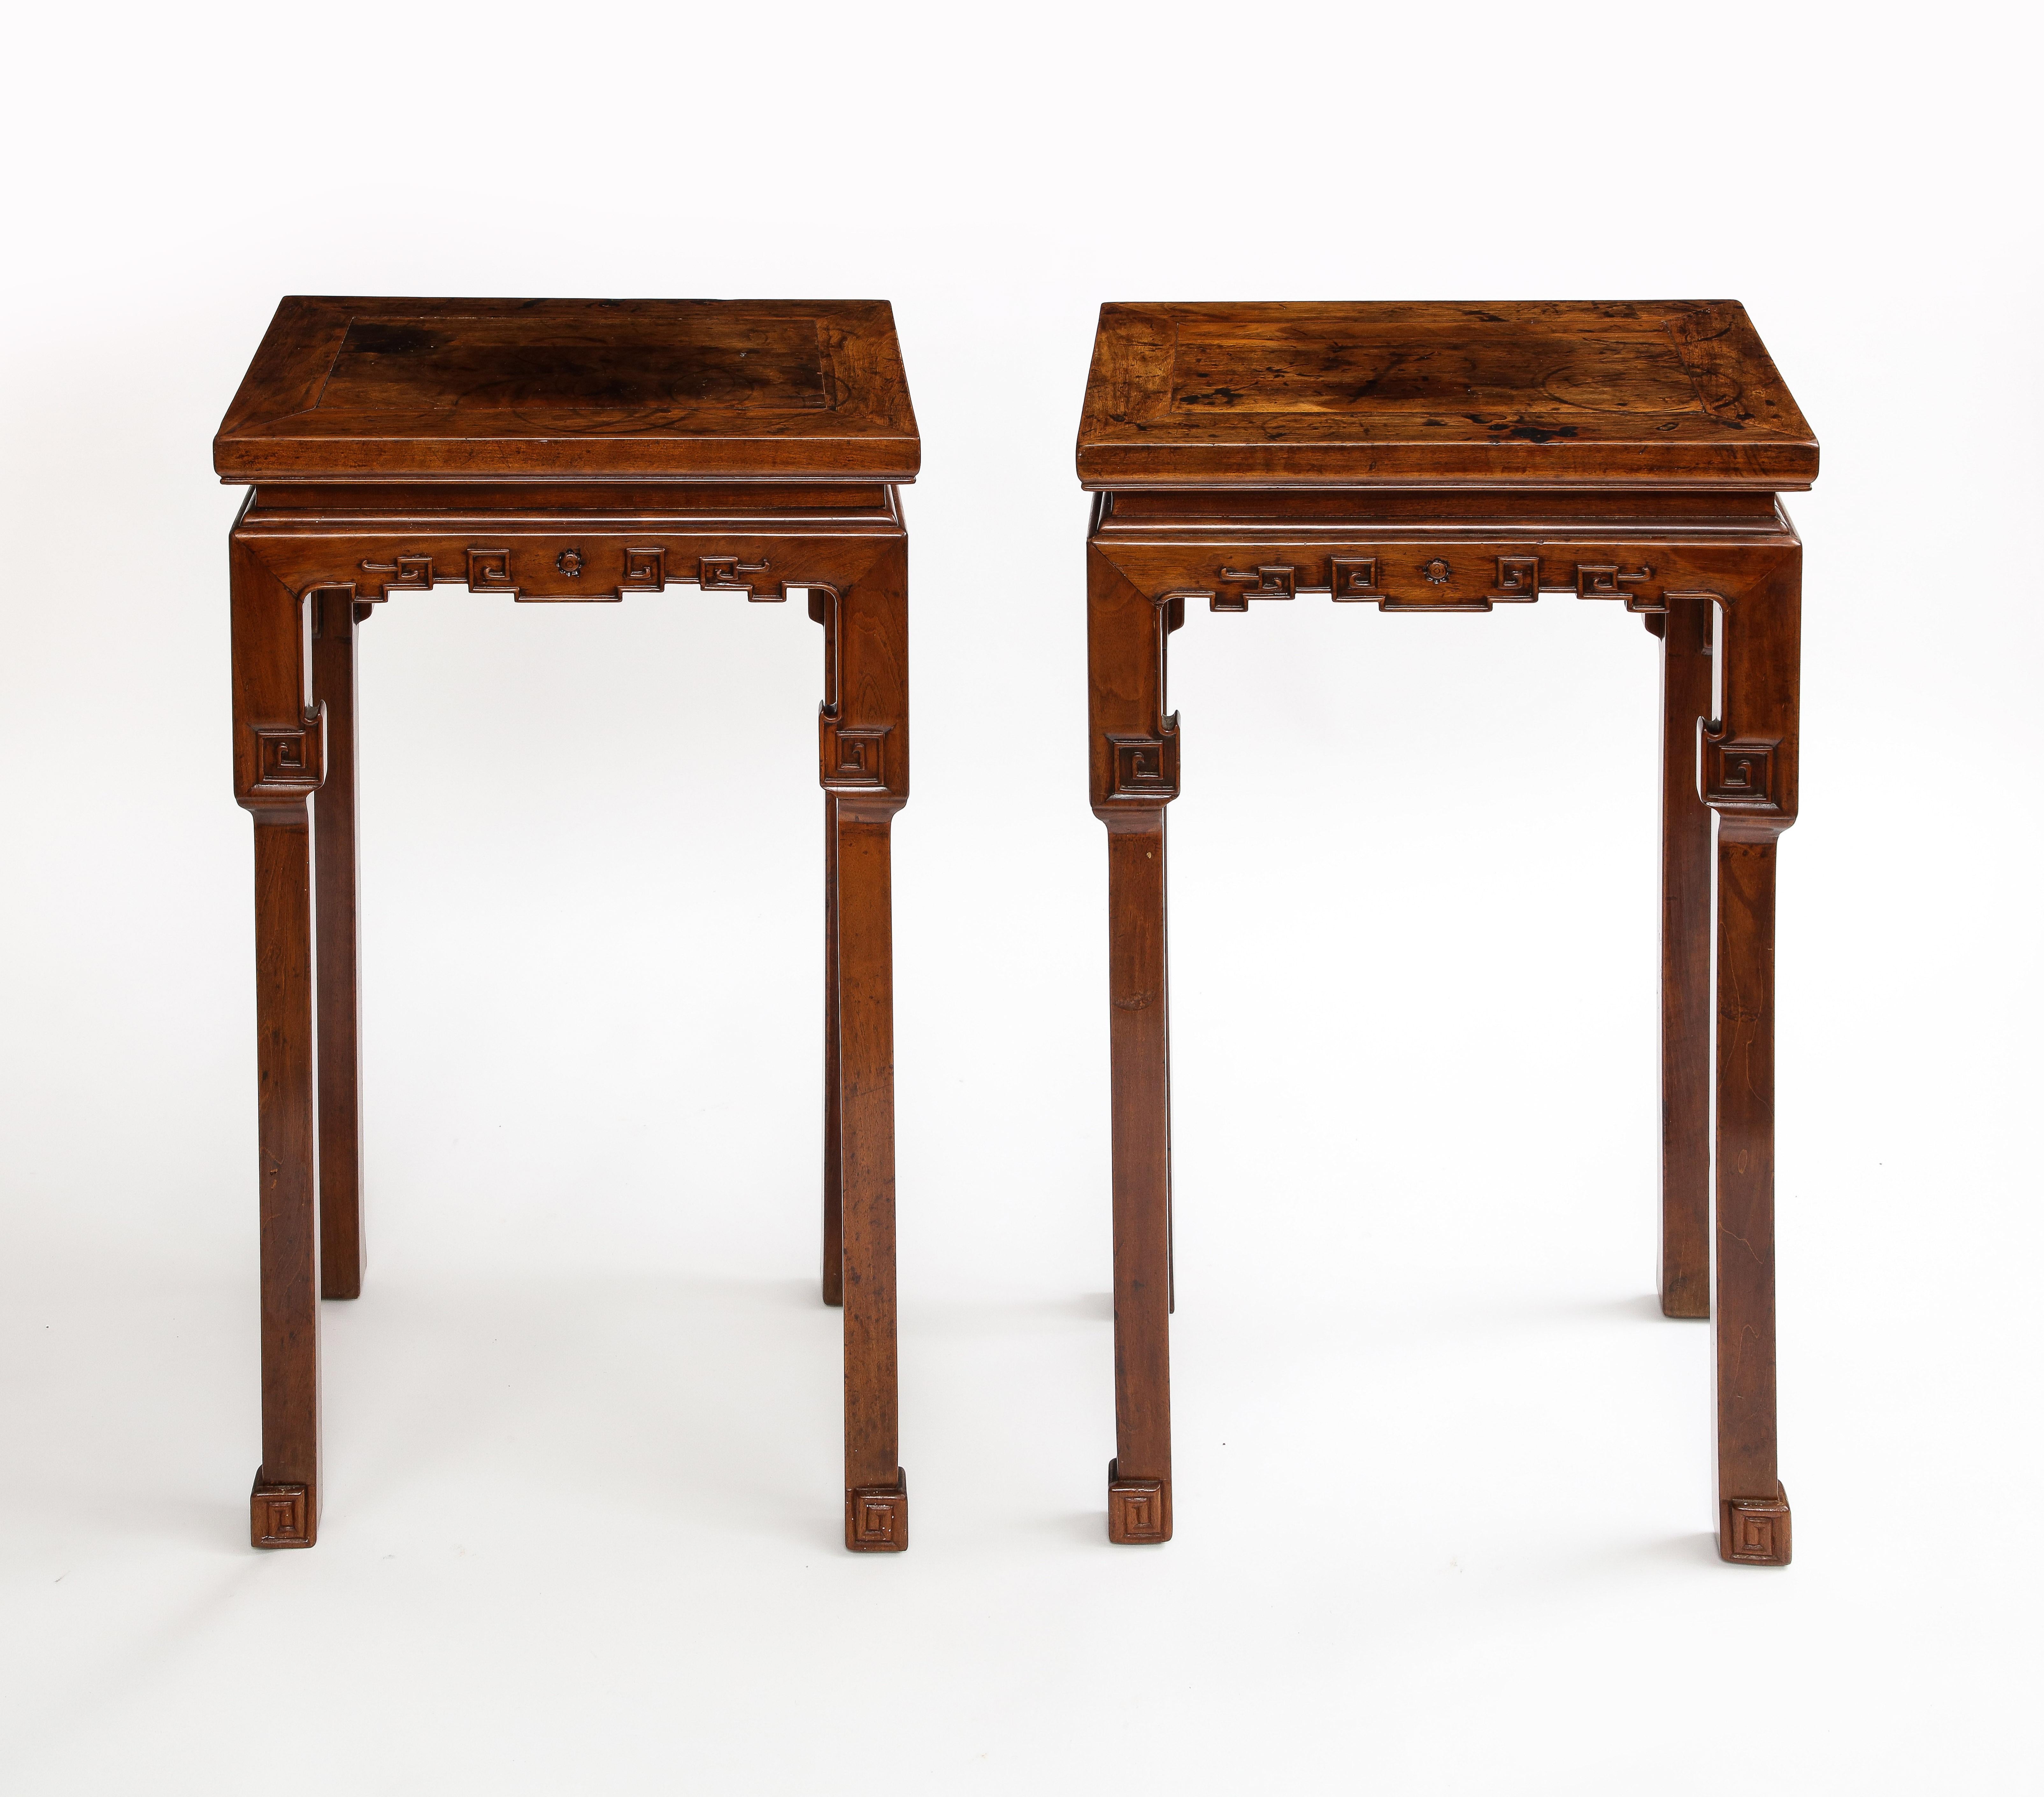 A Pair of 19th Century Qing Dynasty Chinese Carved Hardwood Pedestals In Good Condition For Sale In New York, NY